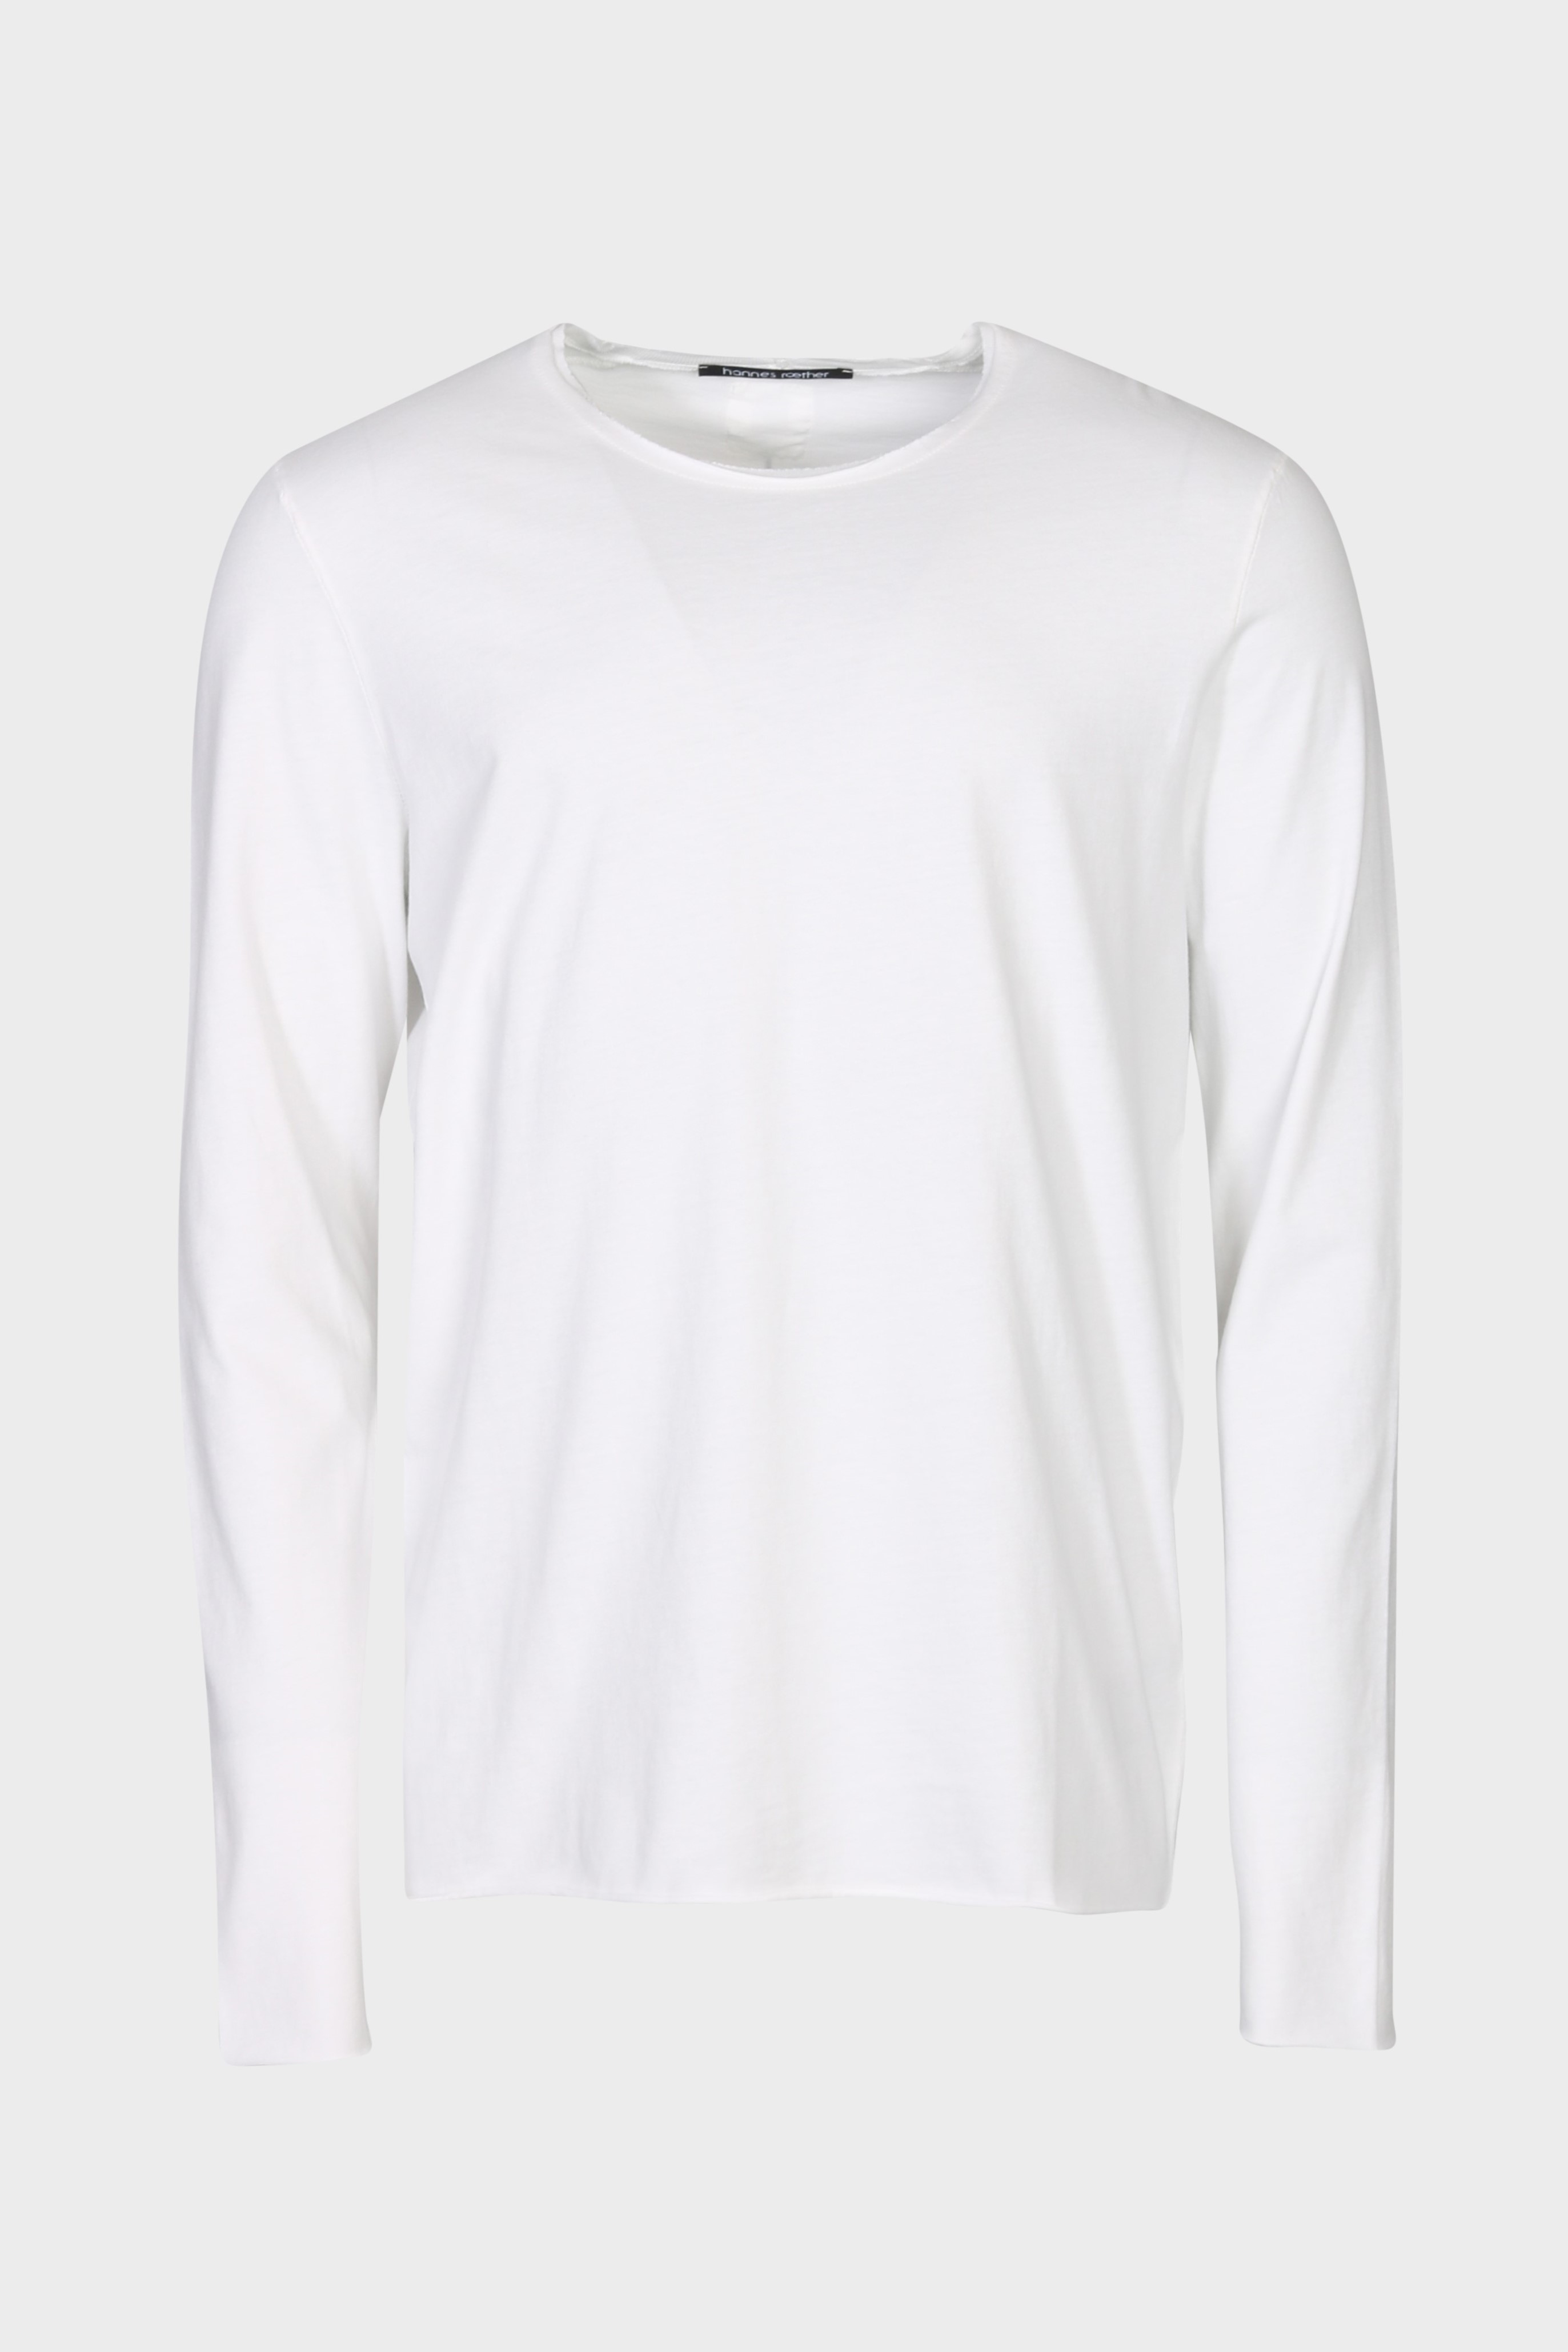 HANNES ROETHER Longsleeve in Off White 2XL